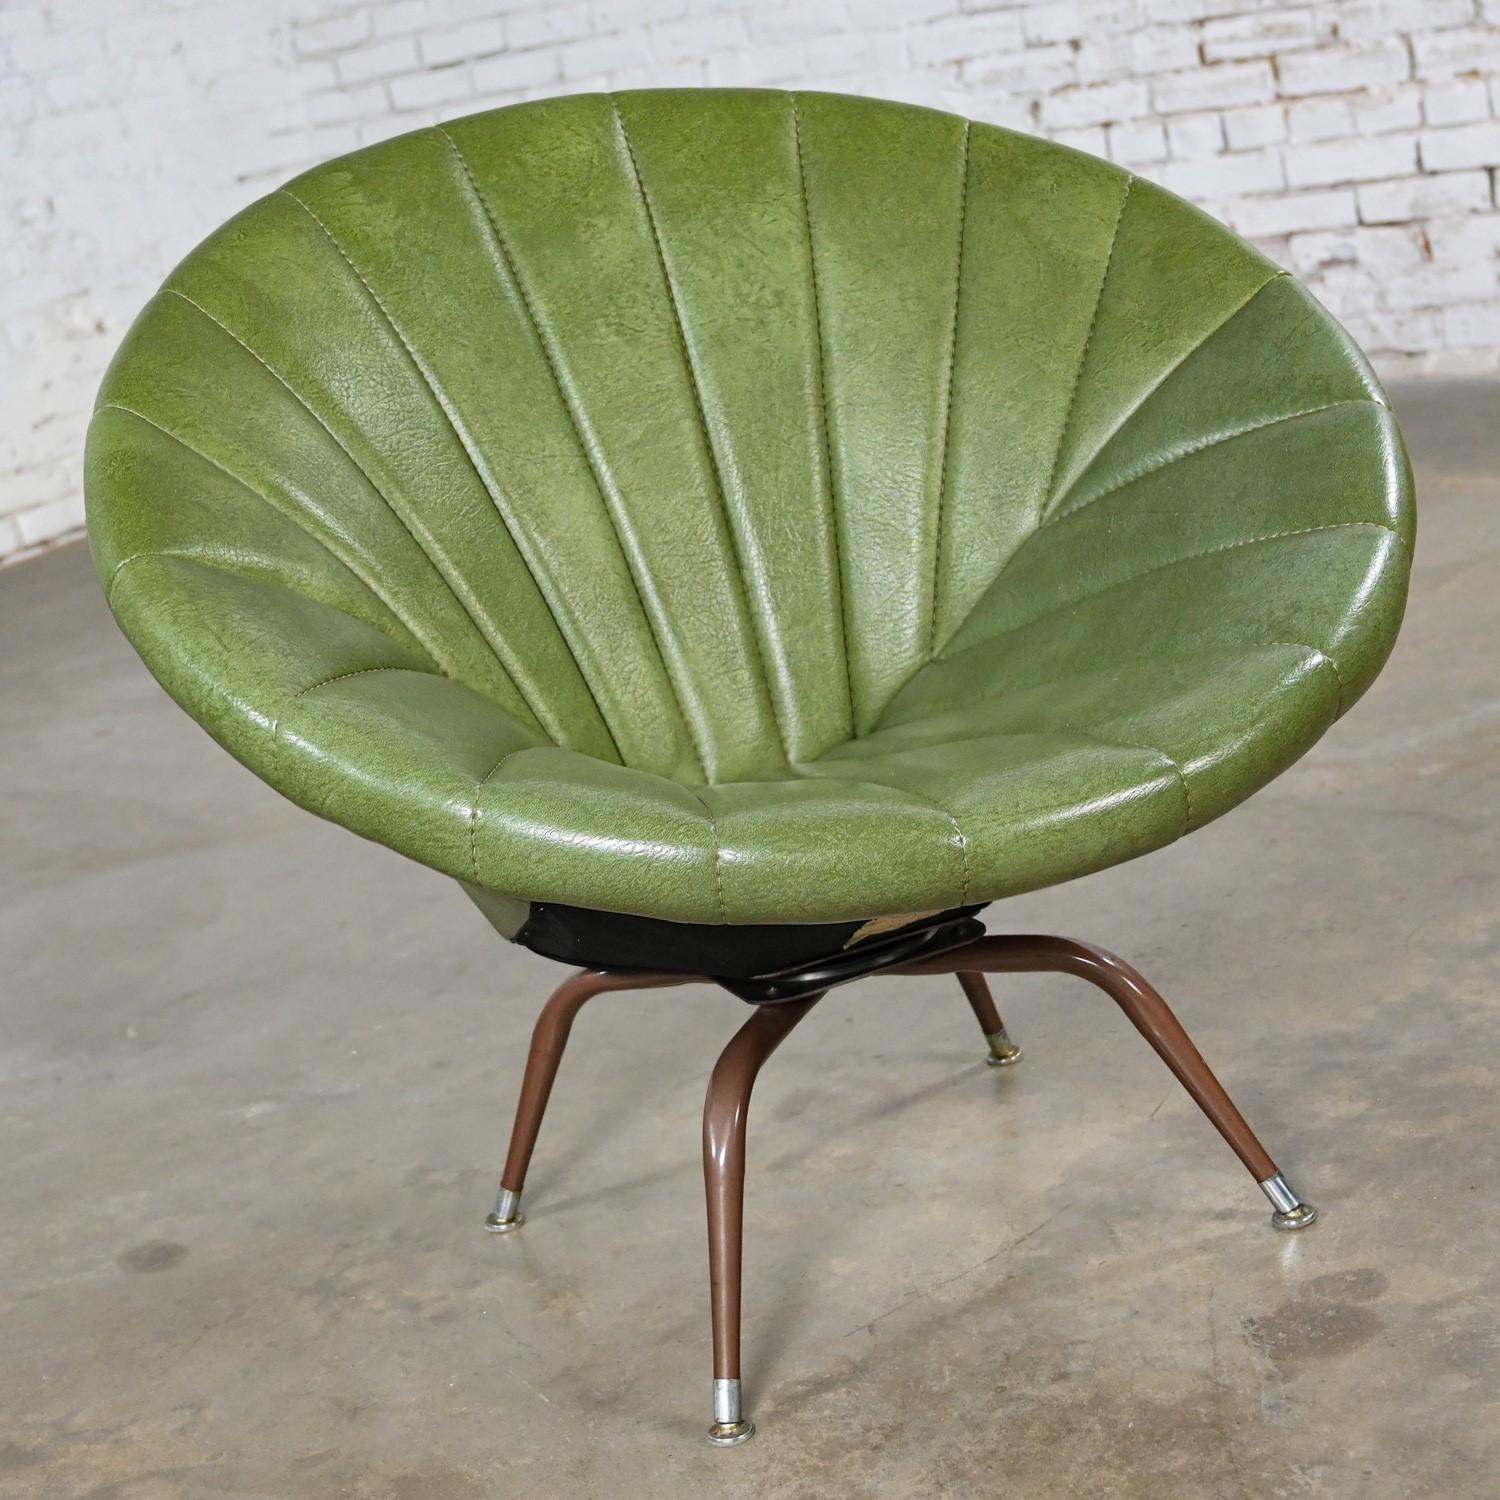 Awesome vintage Mid Century Modern Whillock Mfg. Co. green faux leather tub or saucer style swivel chair with copper toned metal leg base & chrome swivel feet with nylon inserts. Beautiful condition, keeping in mind that this is vintage and not new